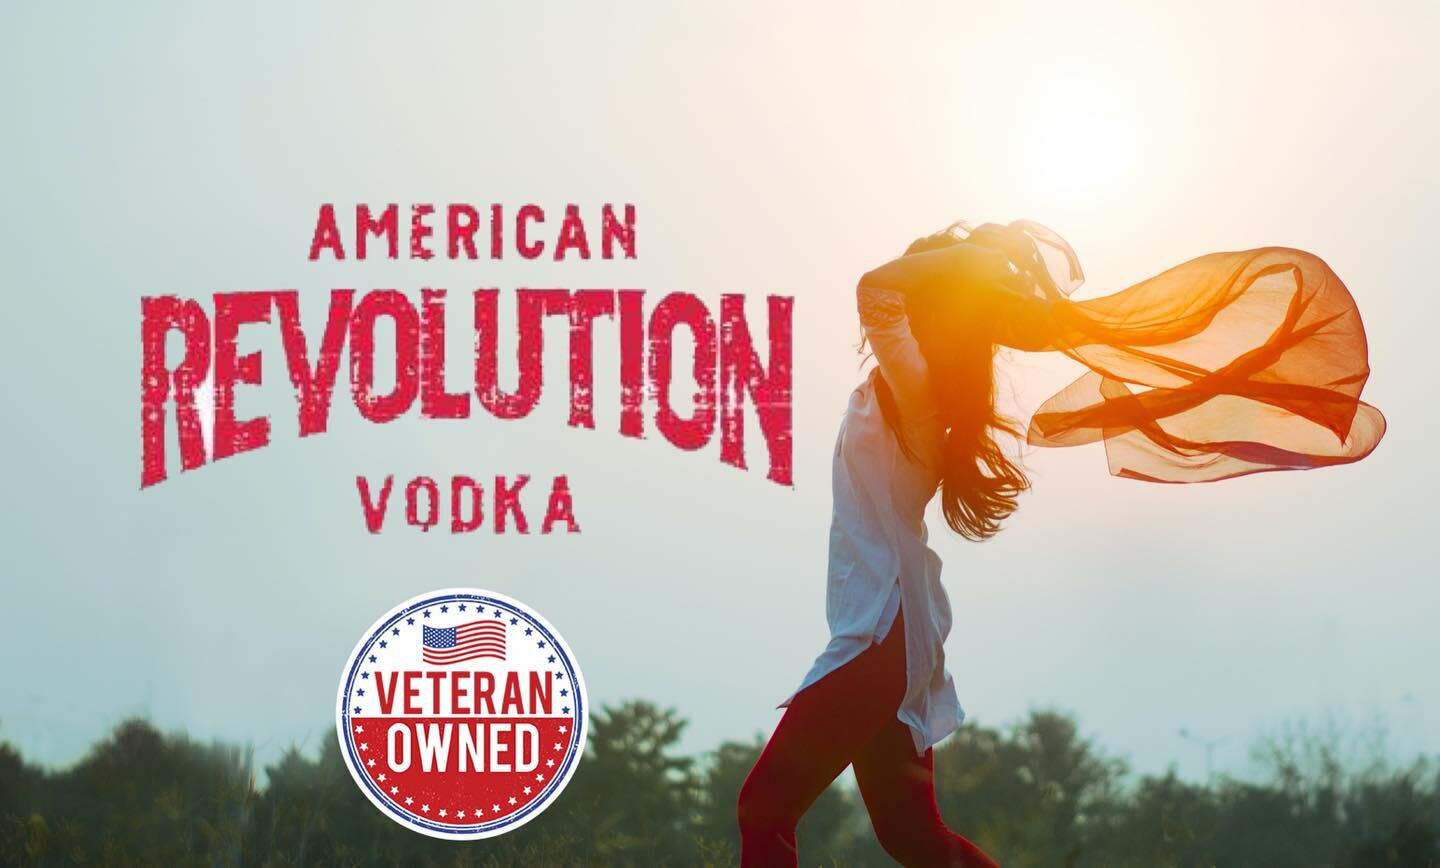 Join the Revolution 🇺🇸

.
.
.
.
#drink #drinks #food #cocktails #bar #cocktail #bartender #vodka #love #premium #mixology #party #alcohol #drinkstagram #foodporn #gin #friends #summer #music #cheers #foodie #drinking #drinkup #yummy #happyhour #coc